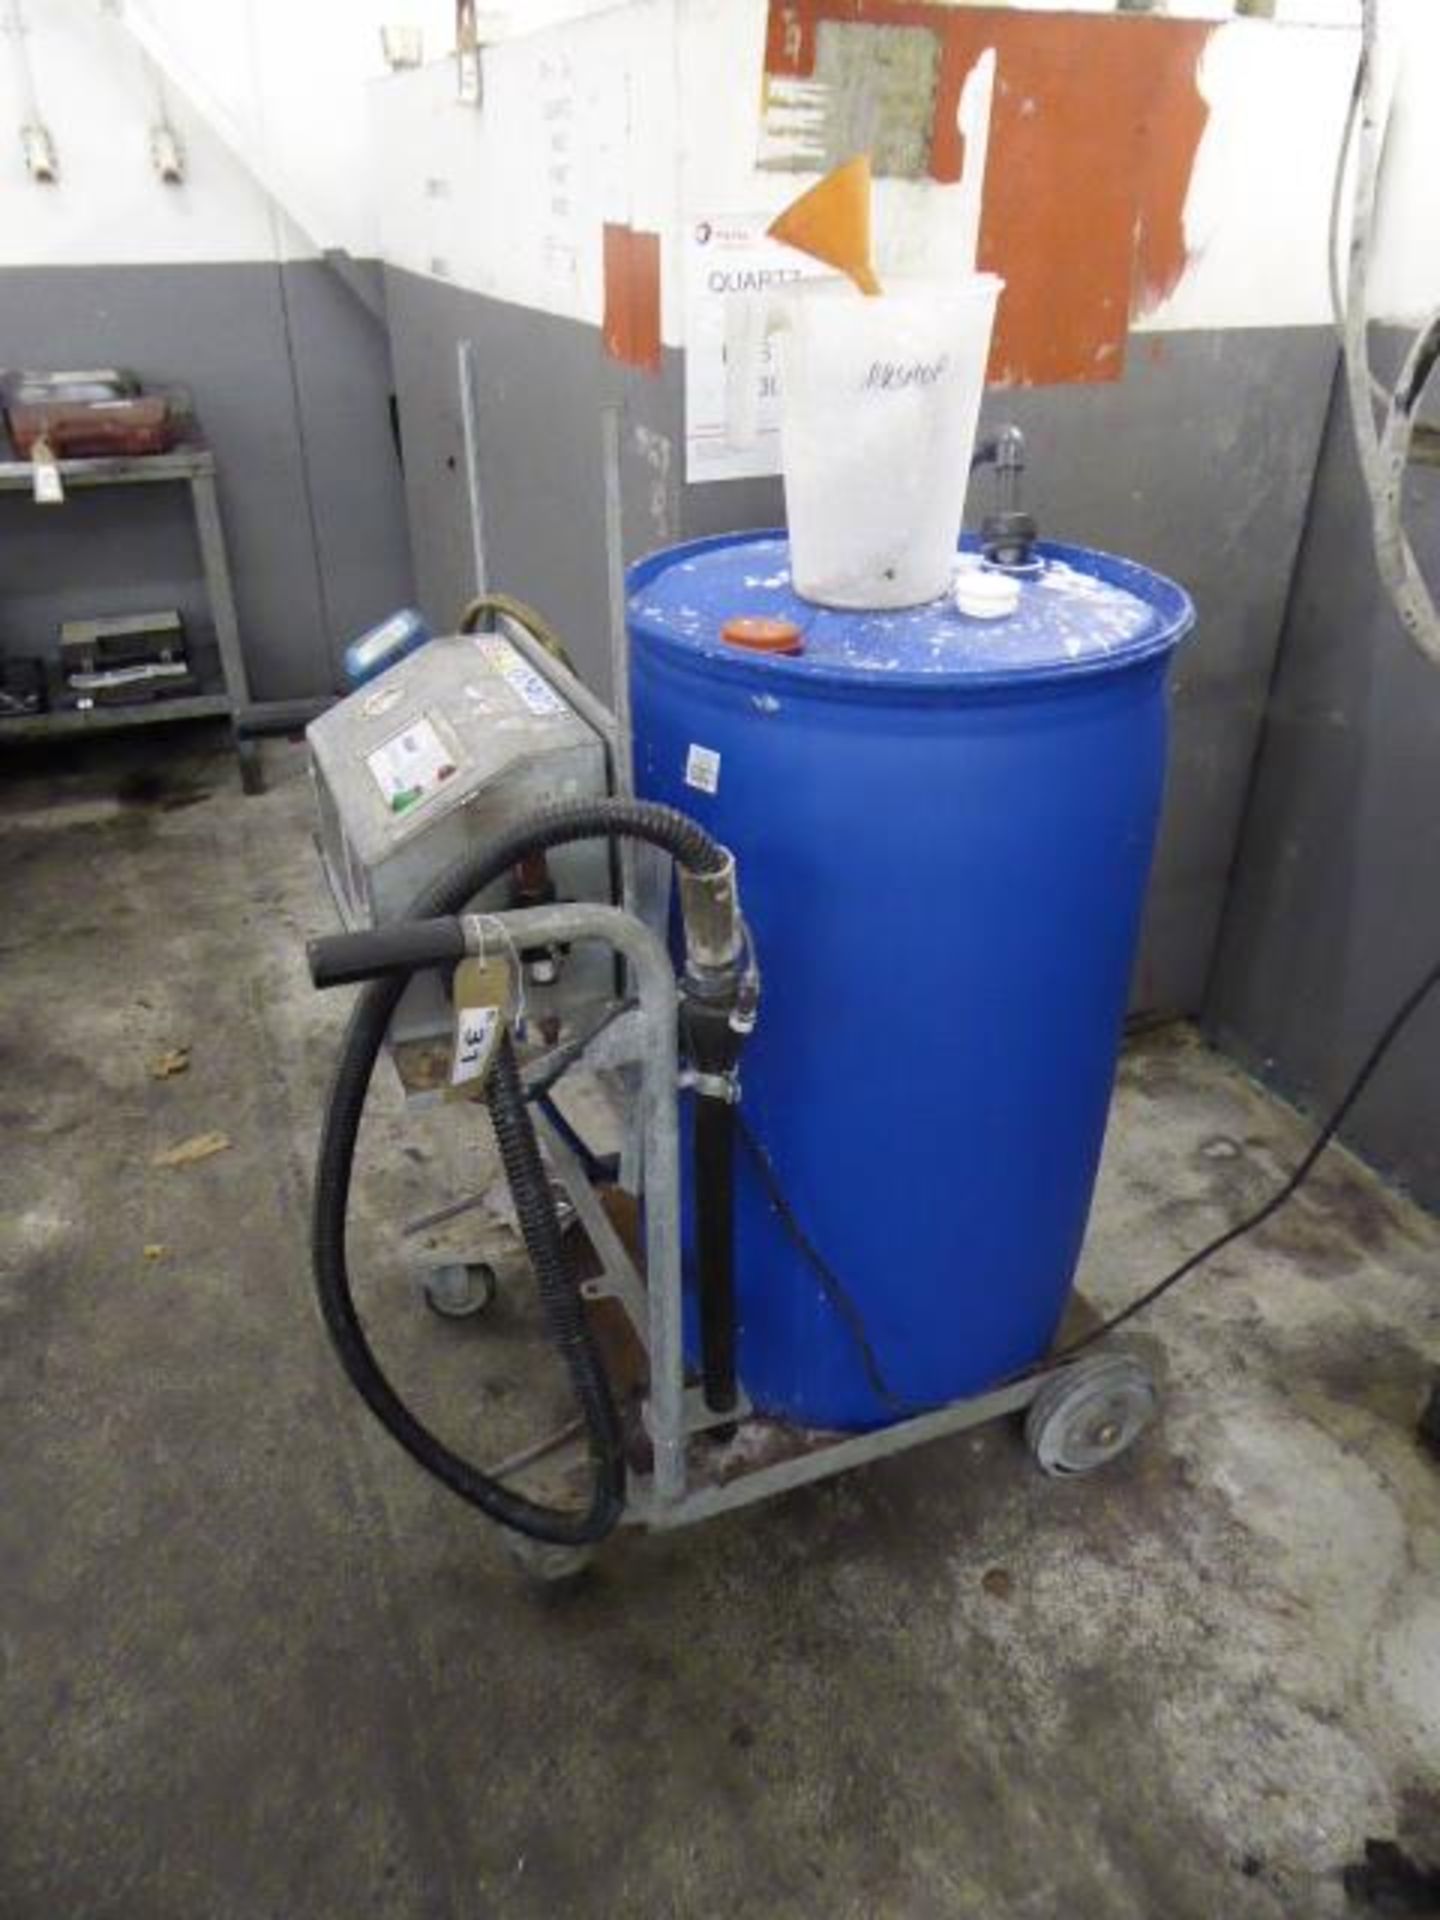 Gartec Adblue filling system on trolley with part barrel of Adblue - Image 4 of 4